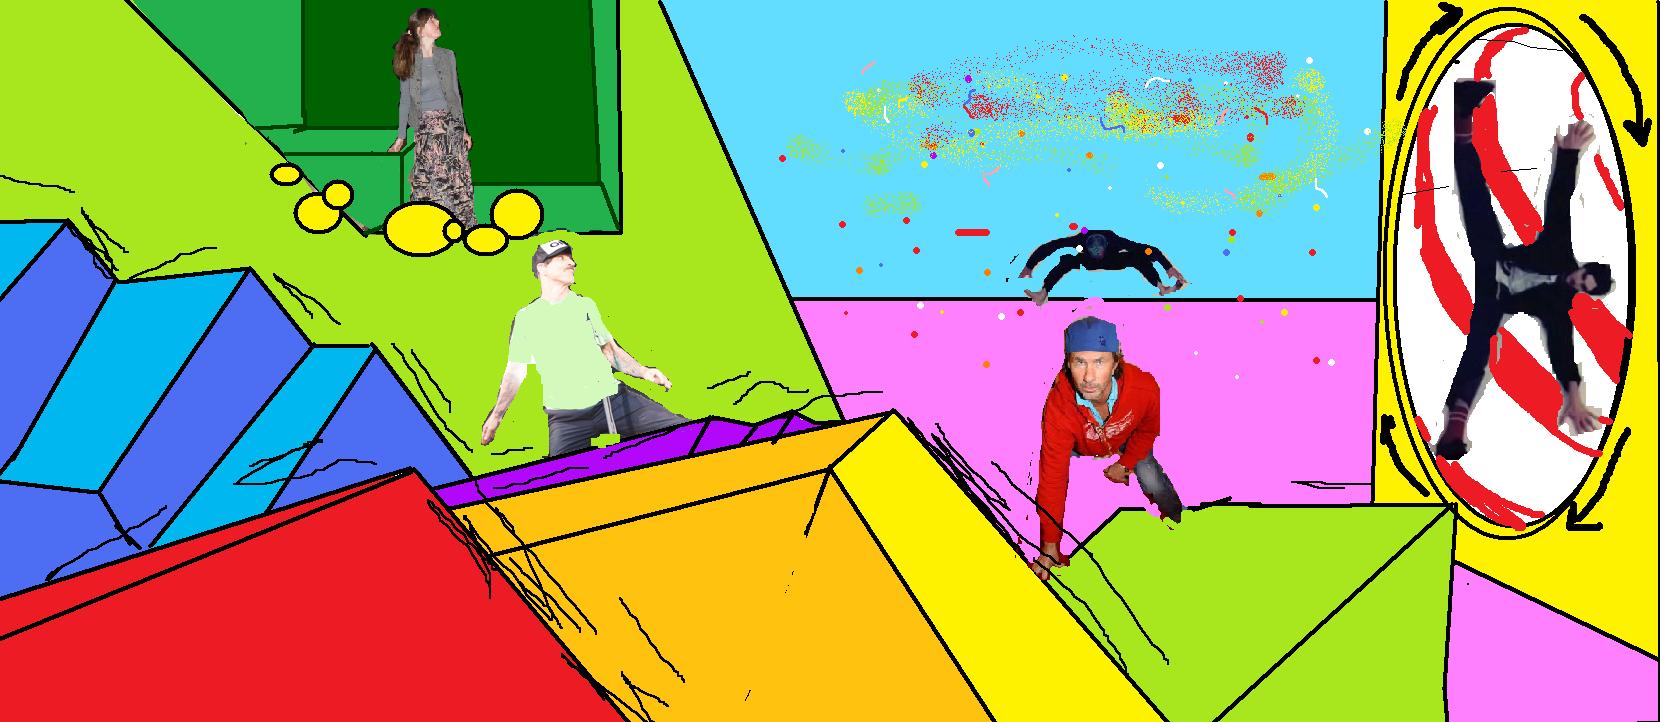 RHCP and I in a funhouse